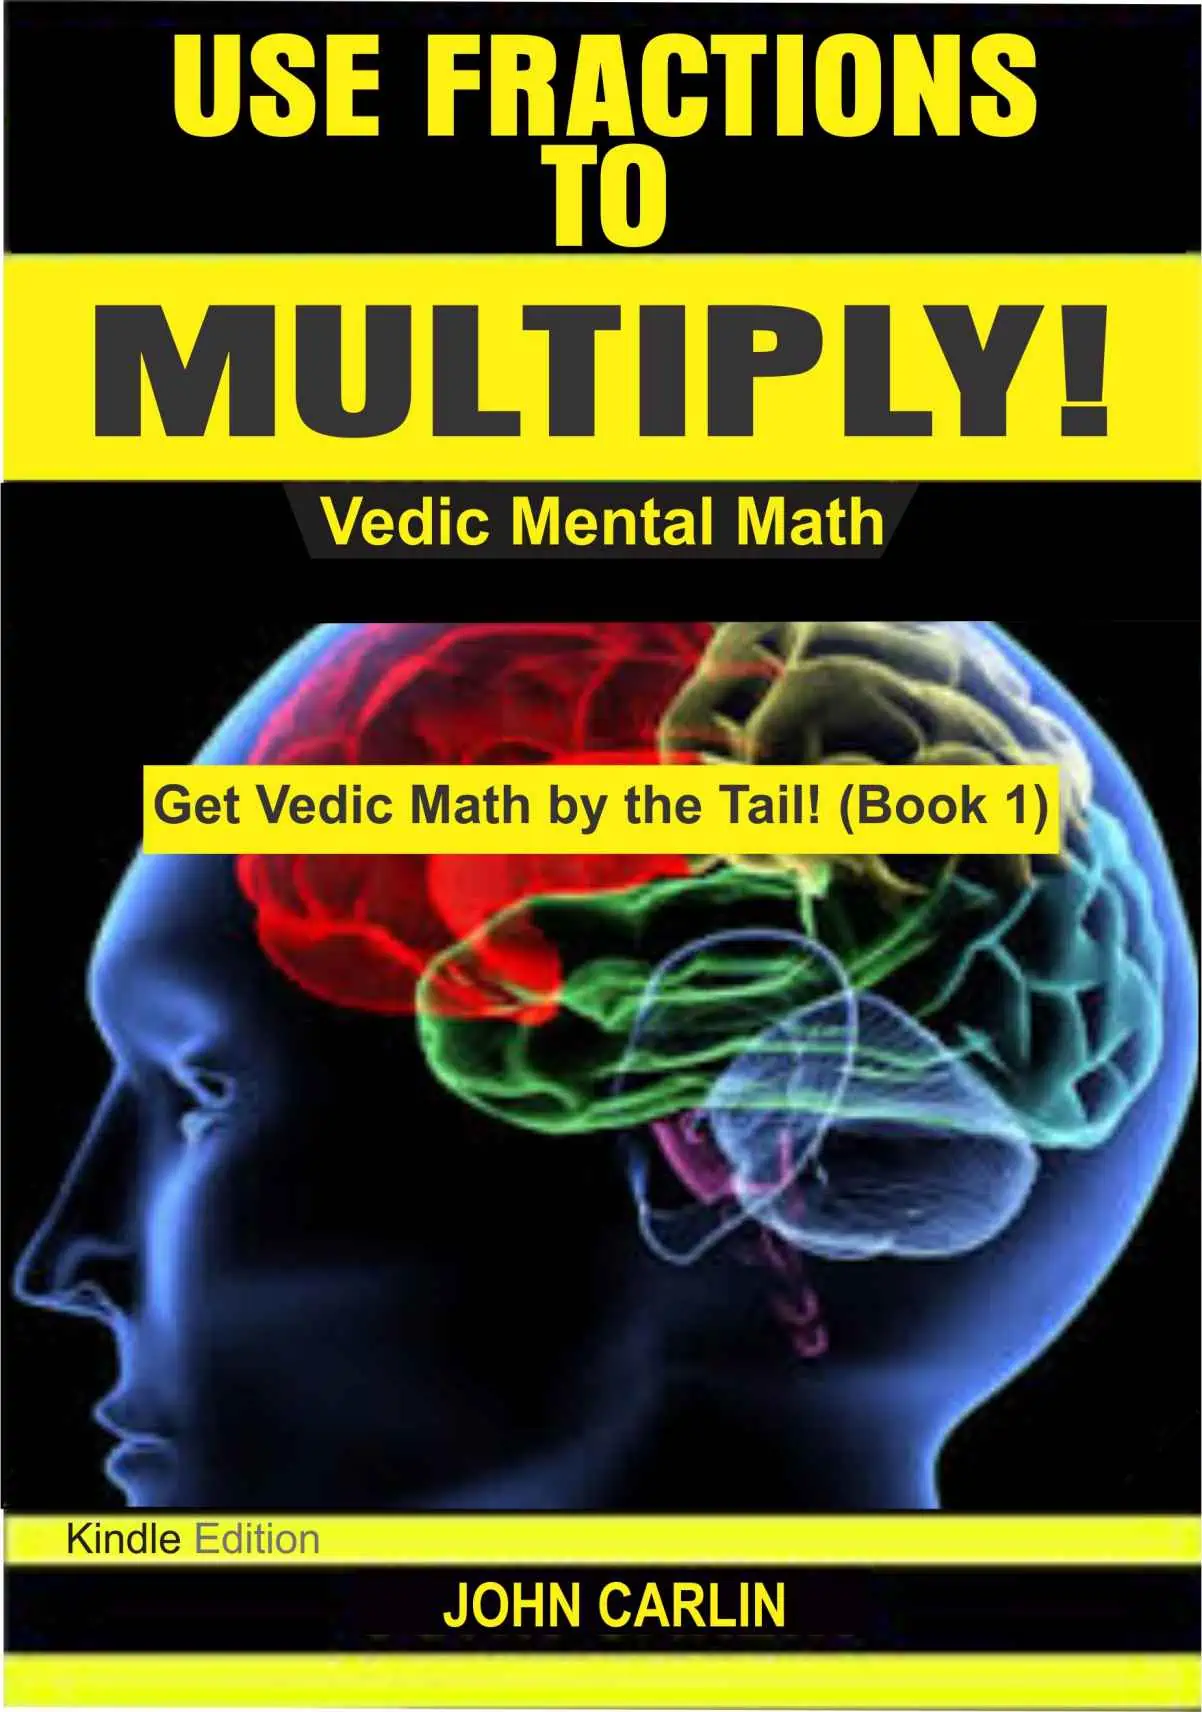 Use Fractions to Multiply! - Vedic Maths - John Carlin [PDF]